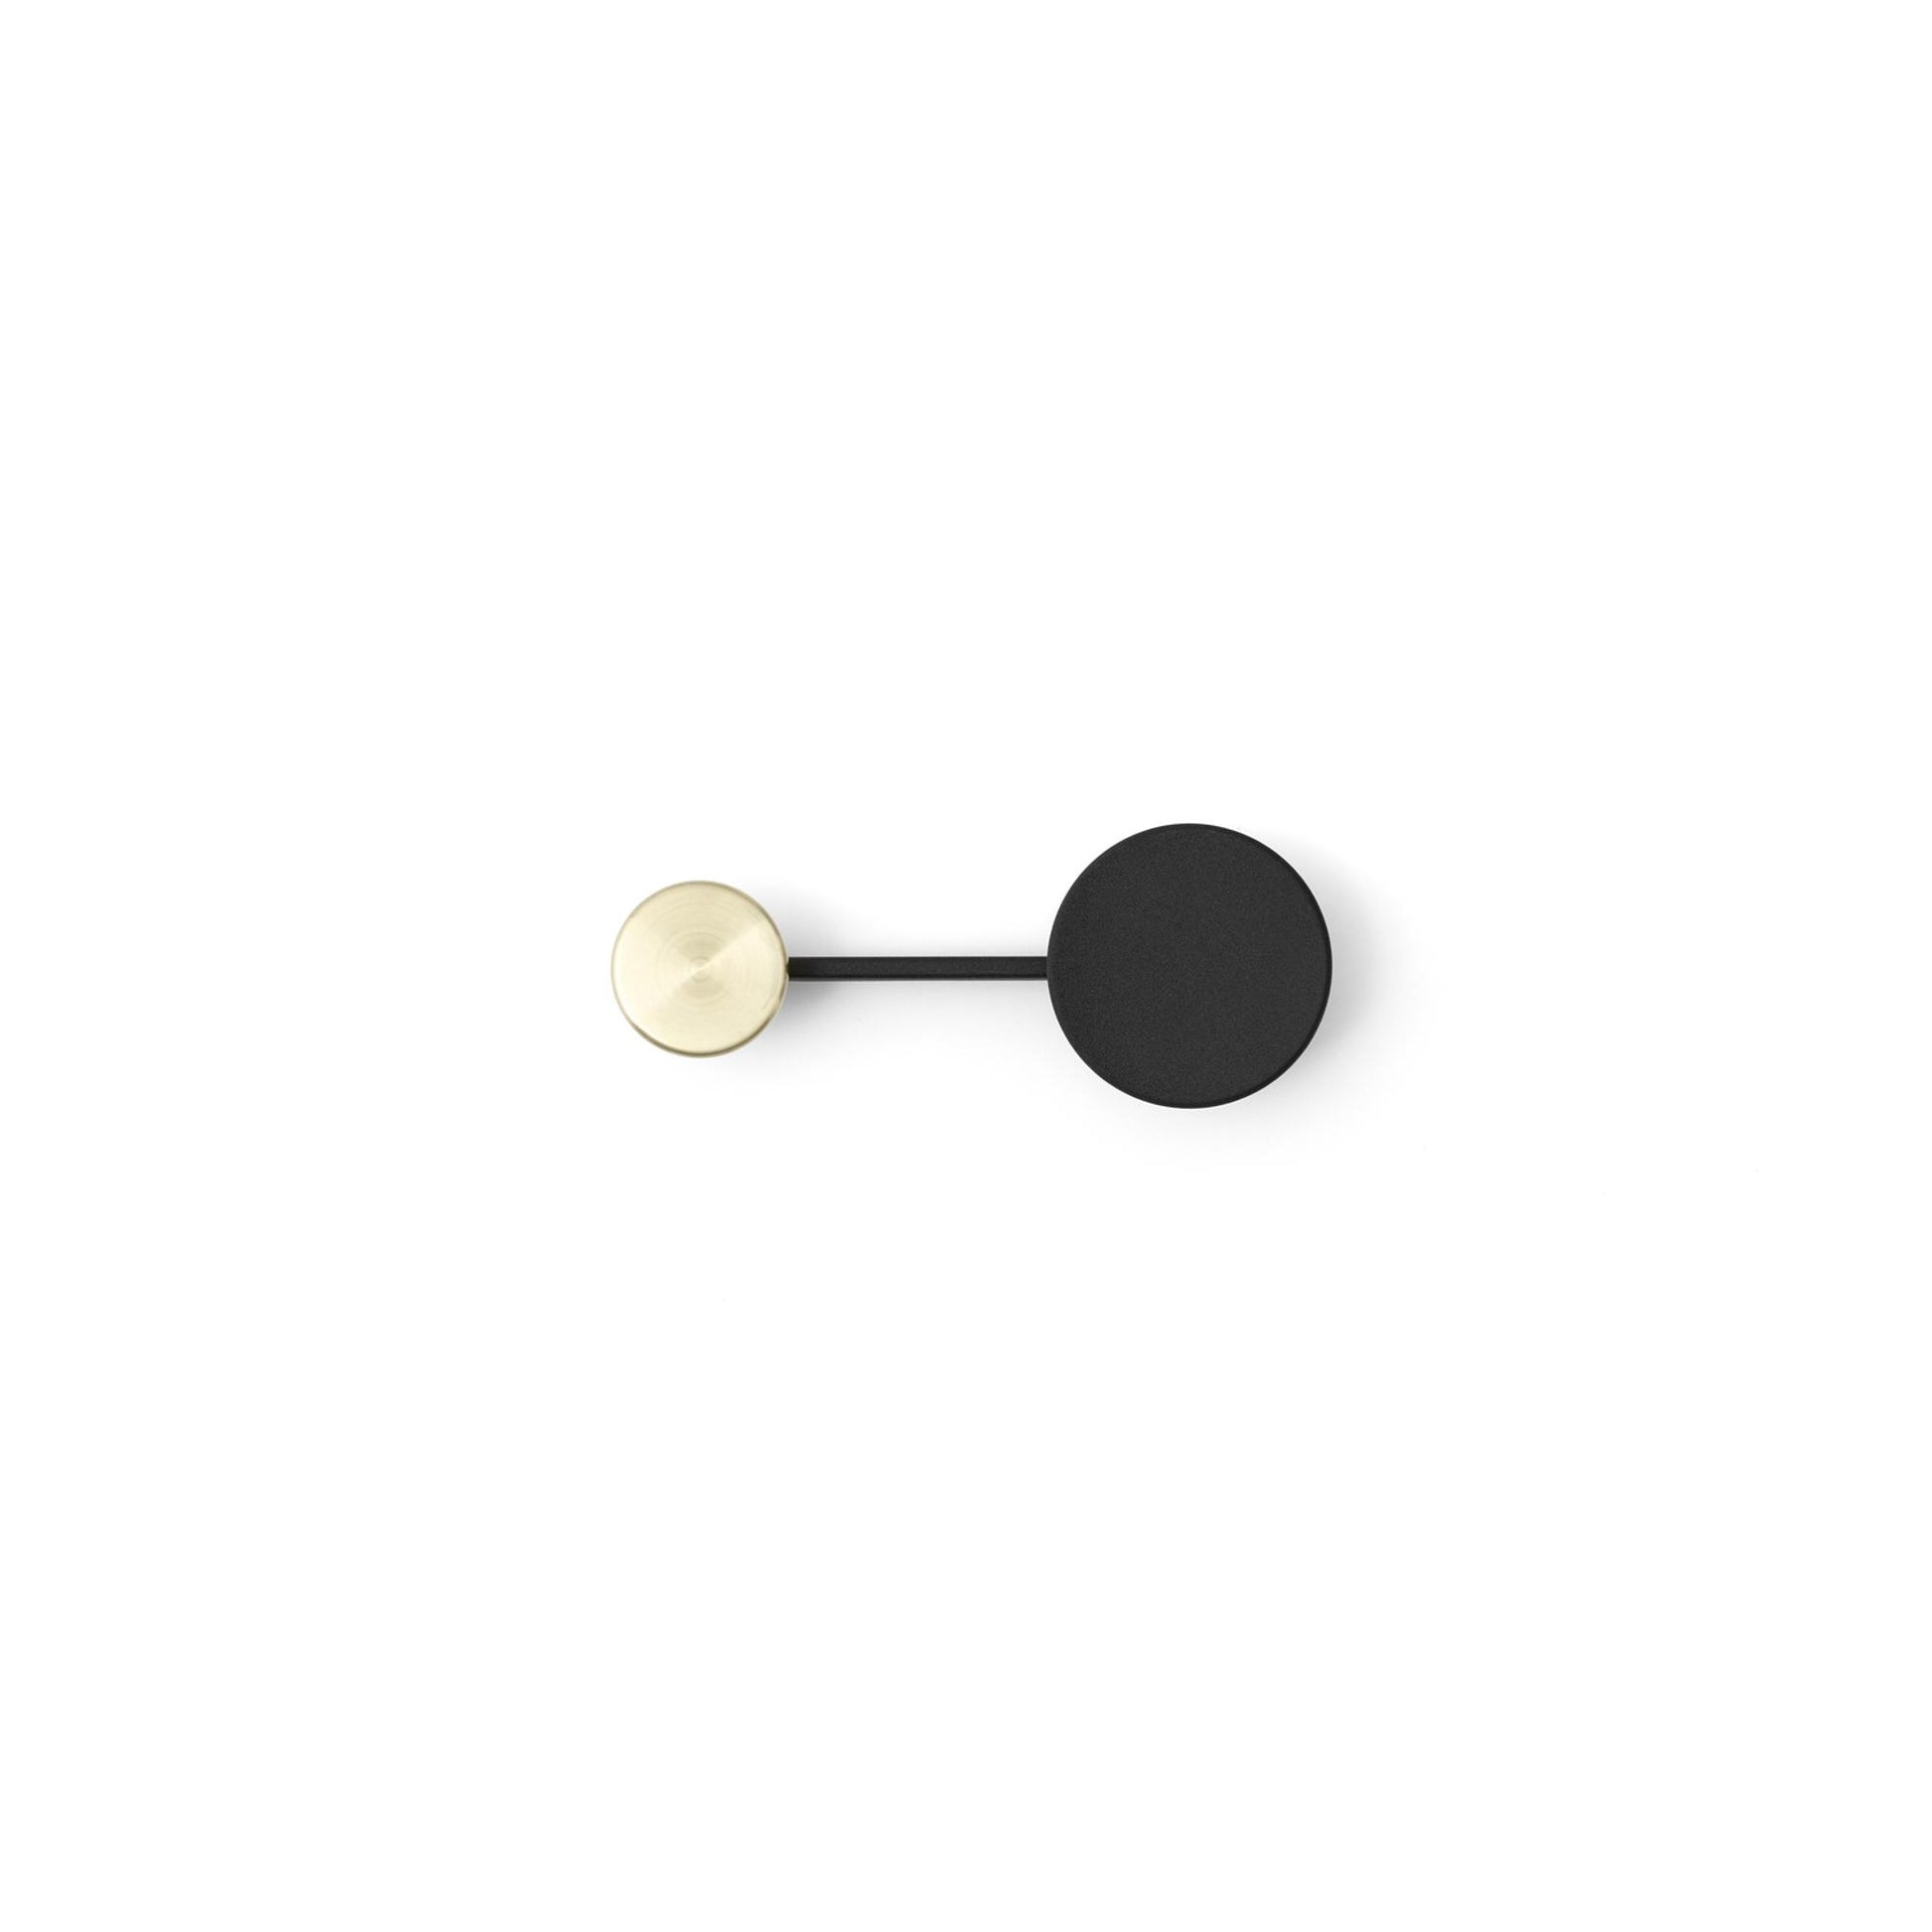 Afteroom Coat Hanger Small by Audo #Black/ Brass